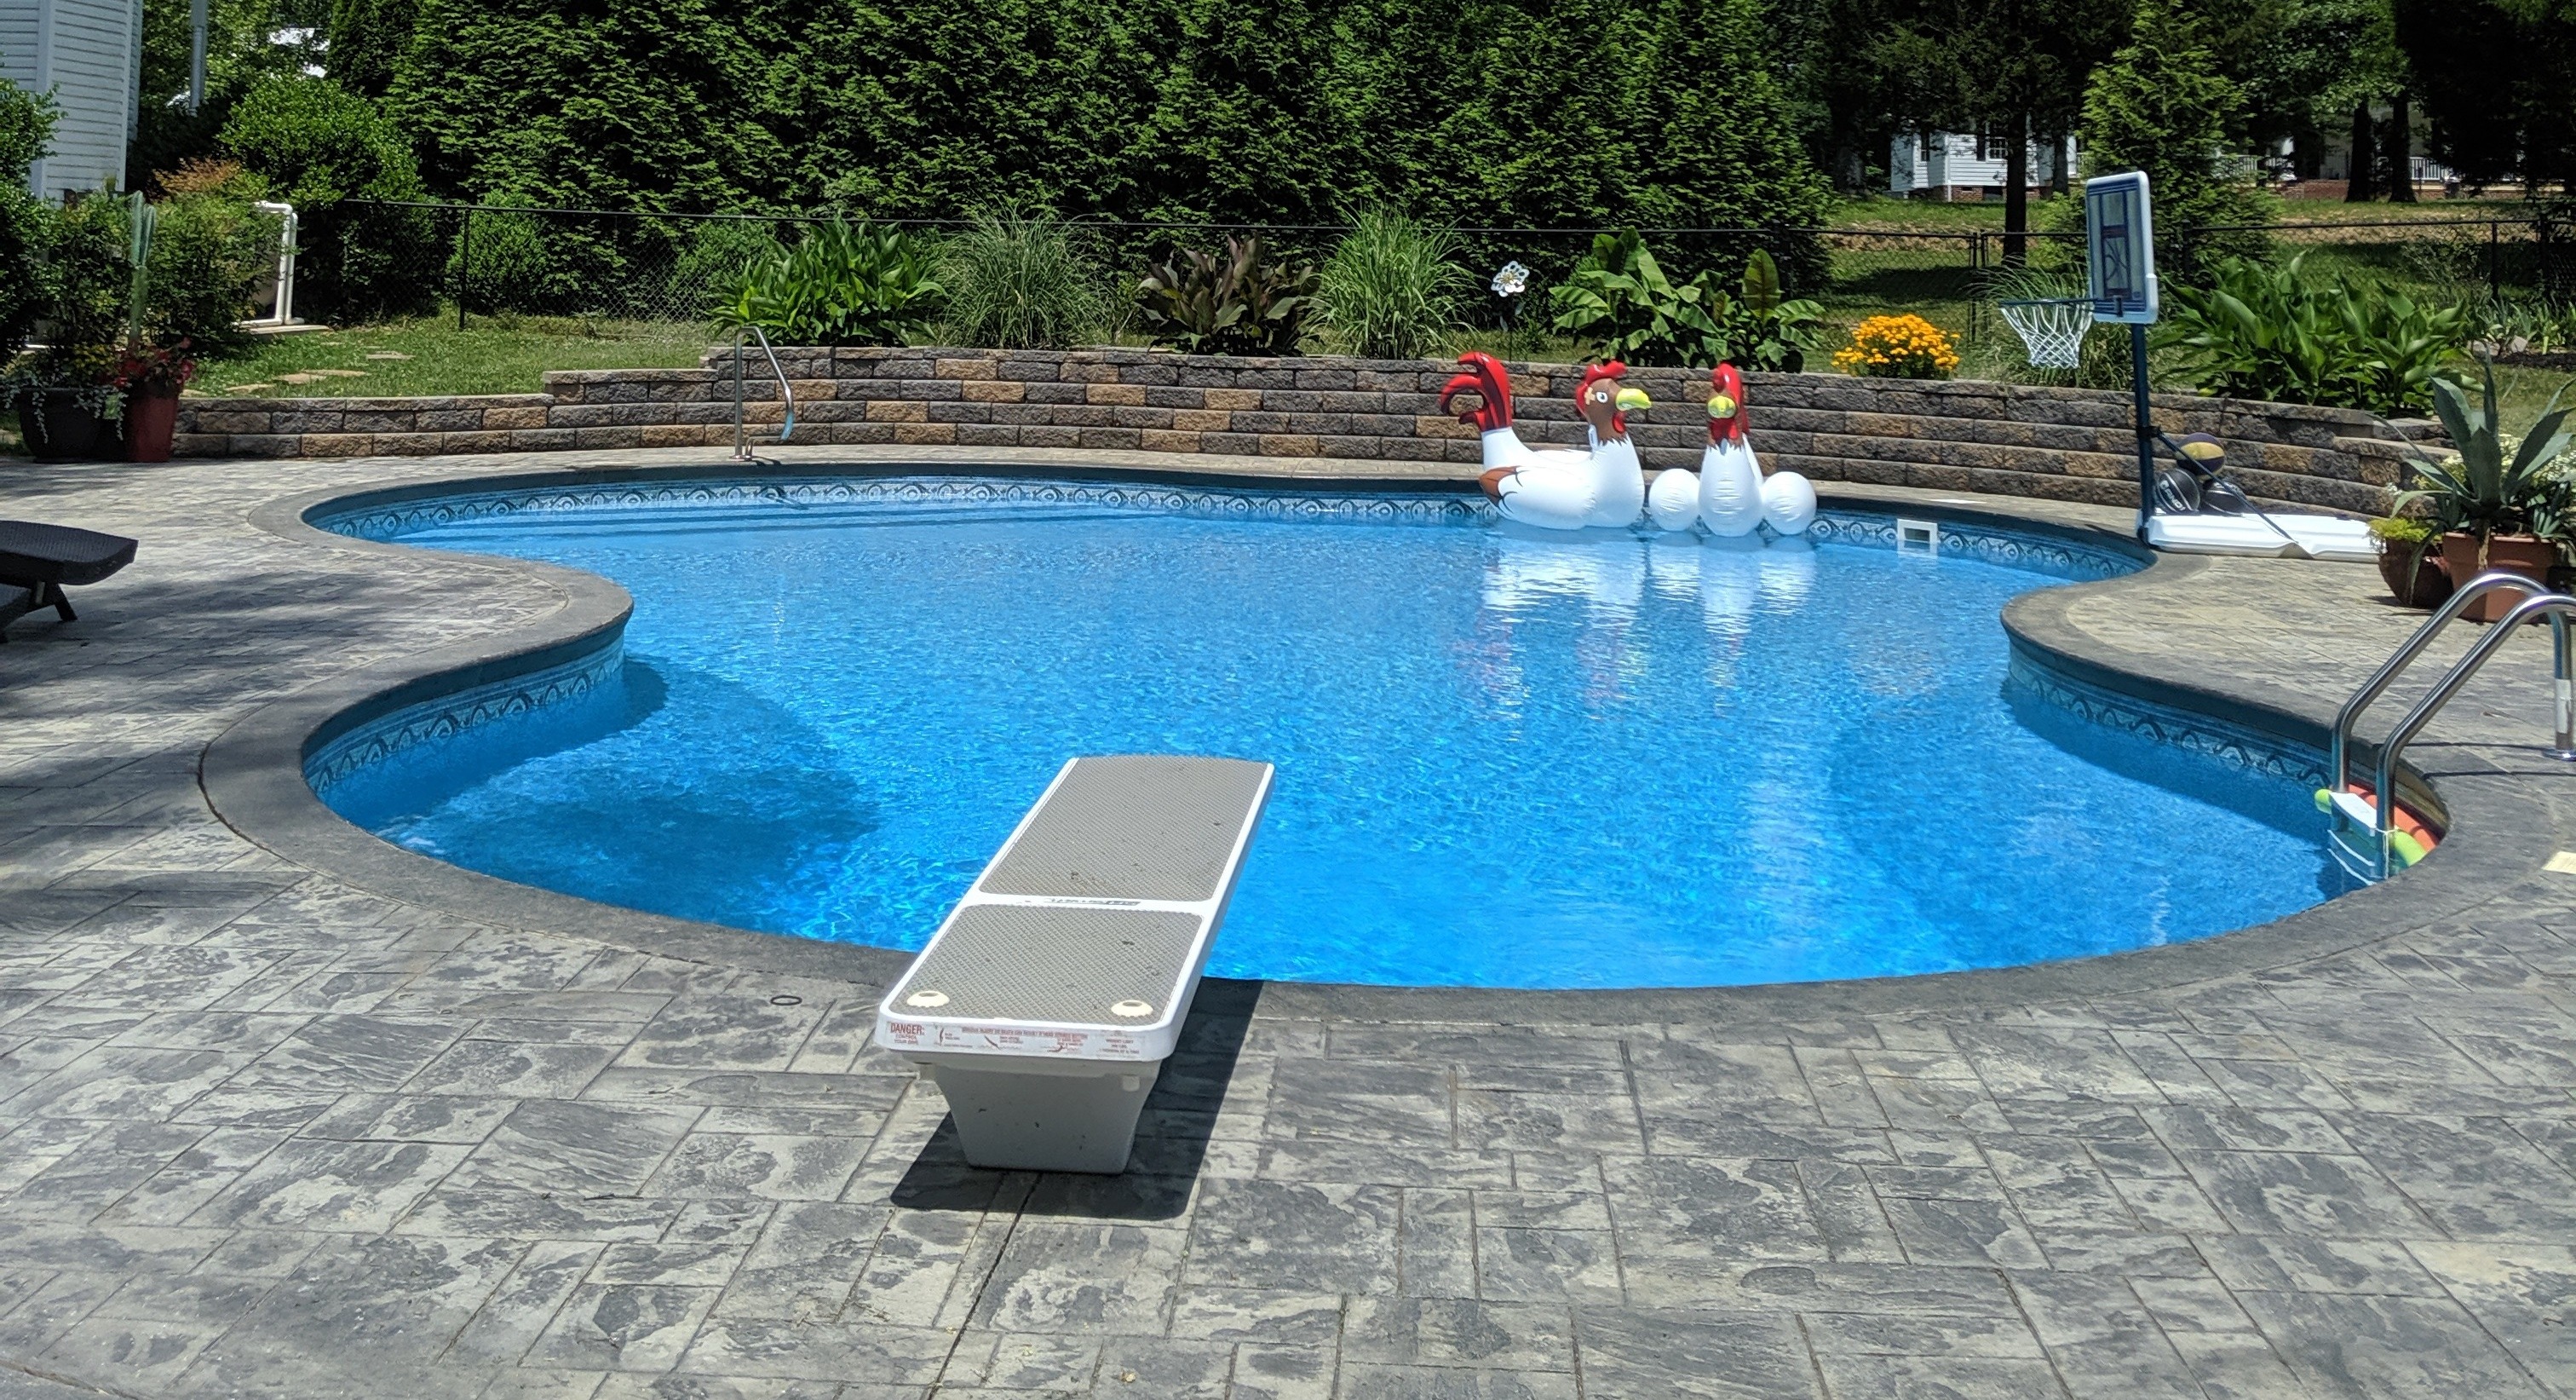 How To Safely Design A Diving Board Pool, Inground Pool Diving Board Installation